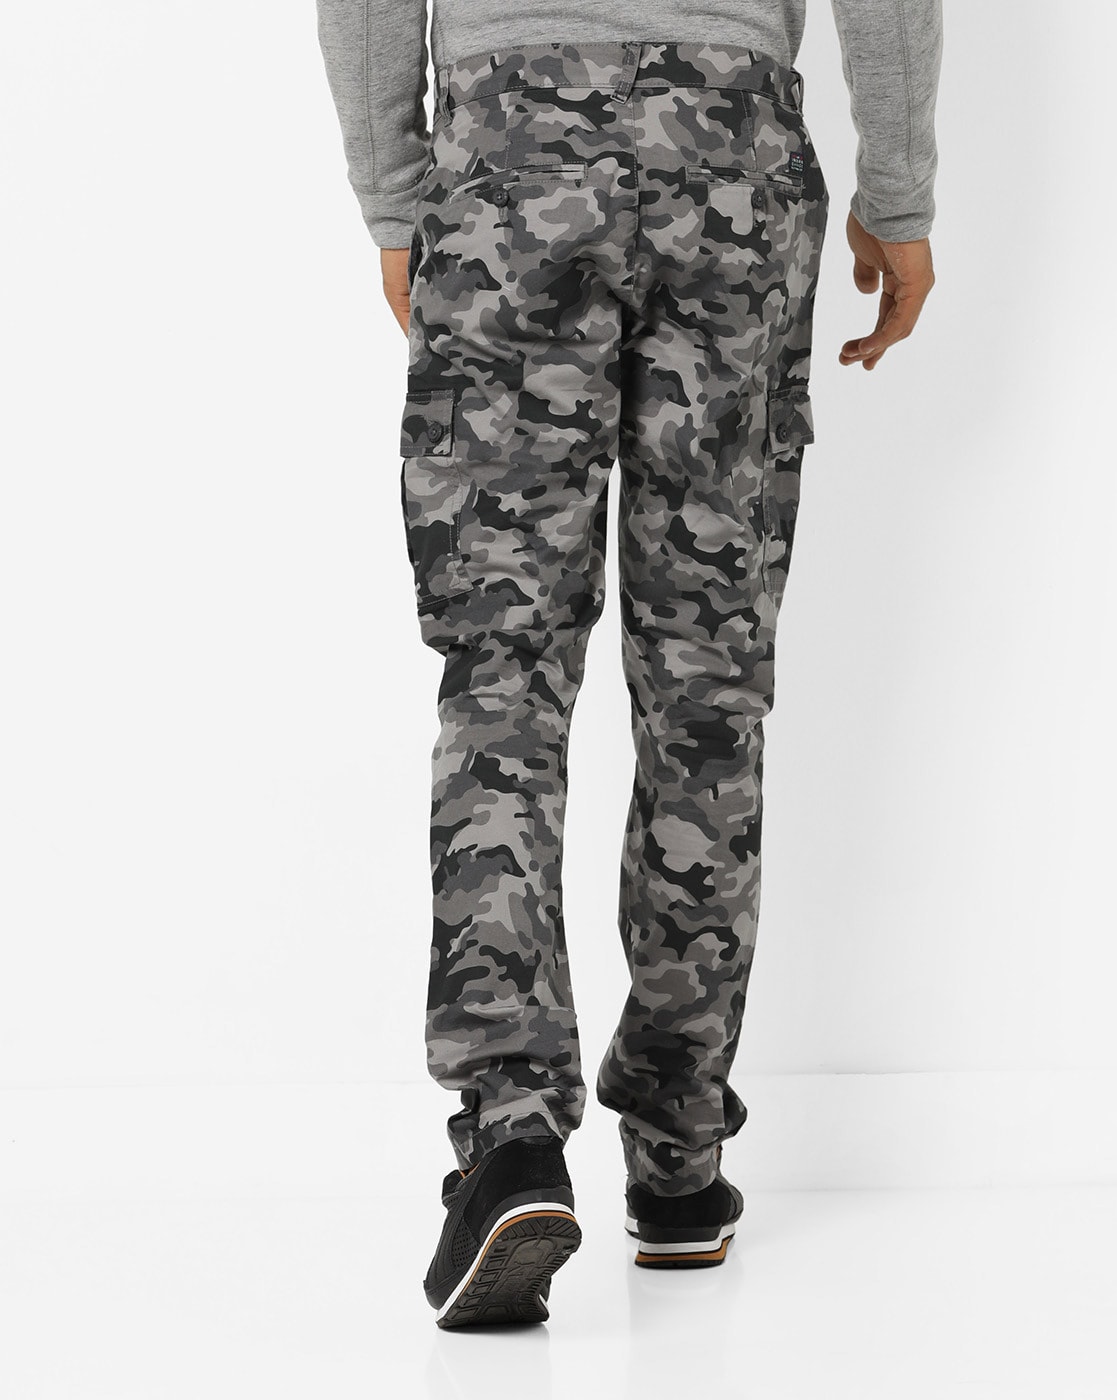 Men's Camo Pants Outfits | The Guide to Wearing Camo Well